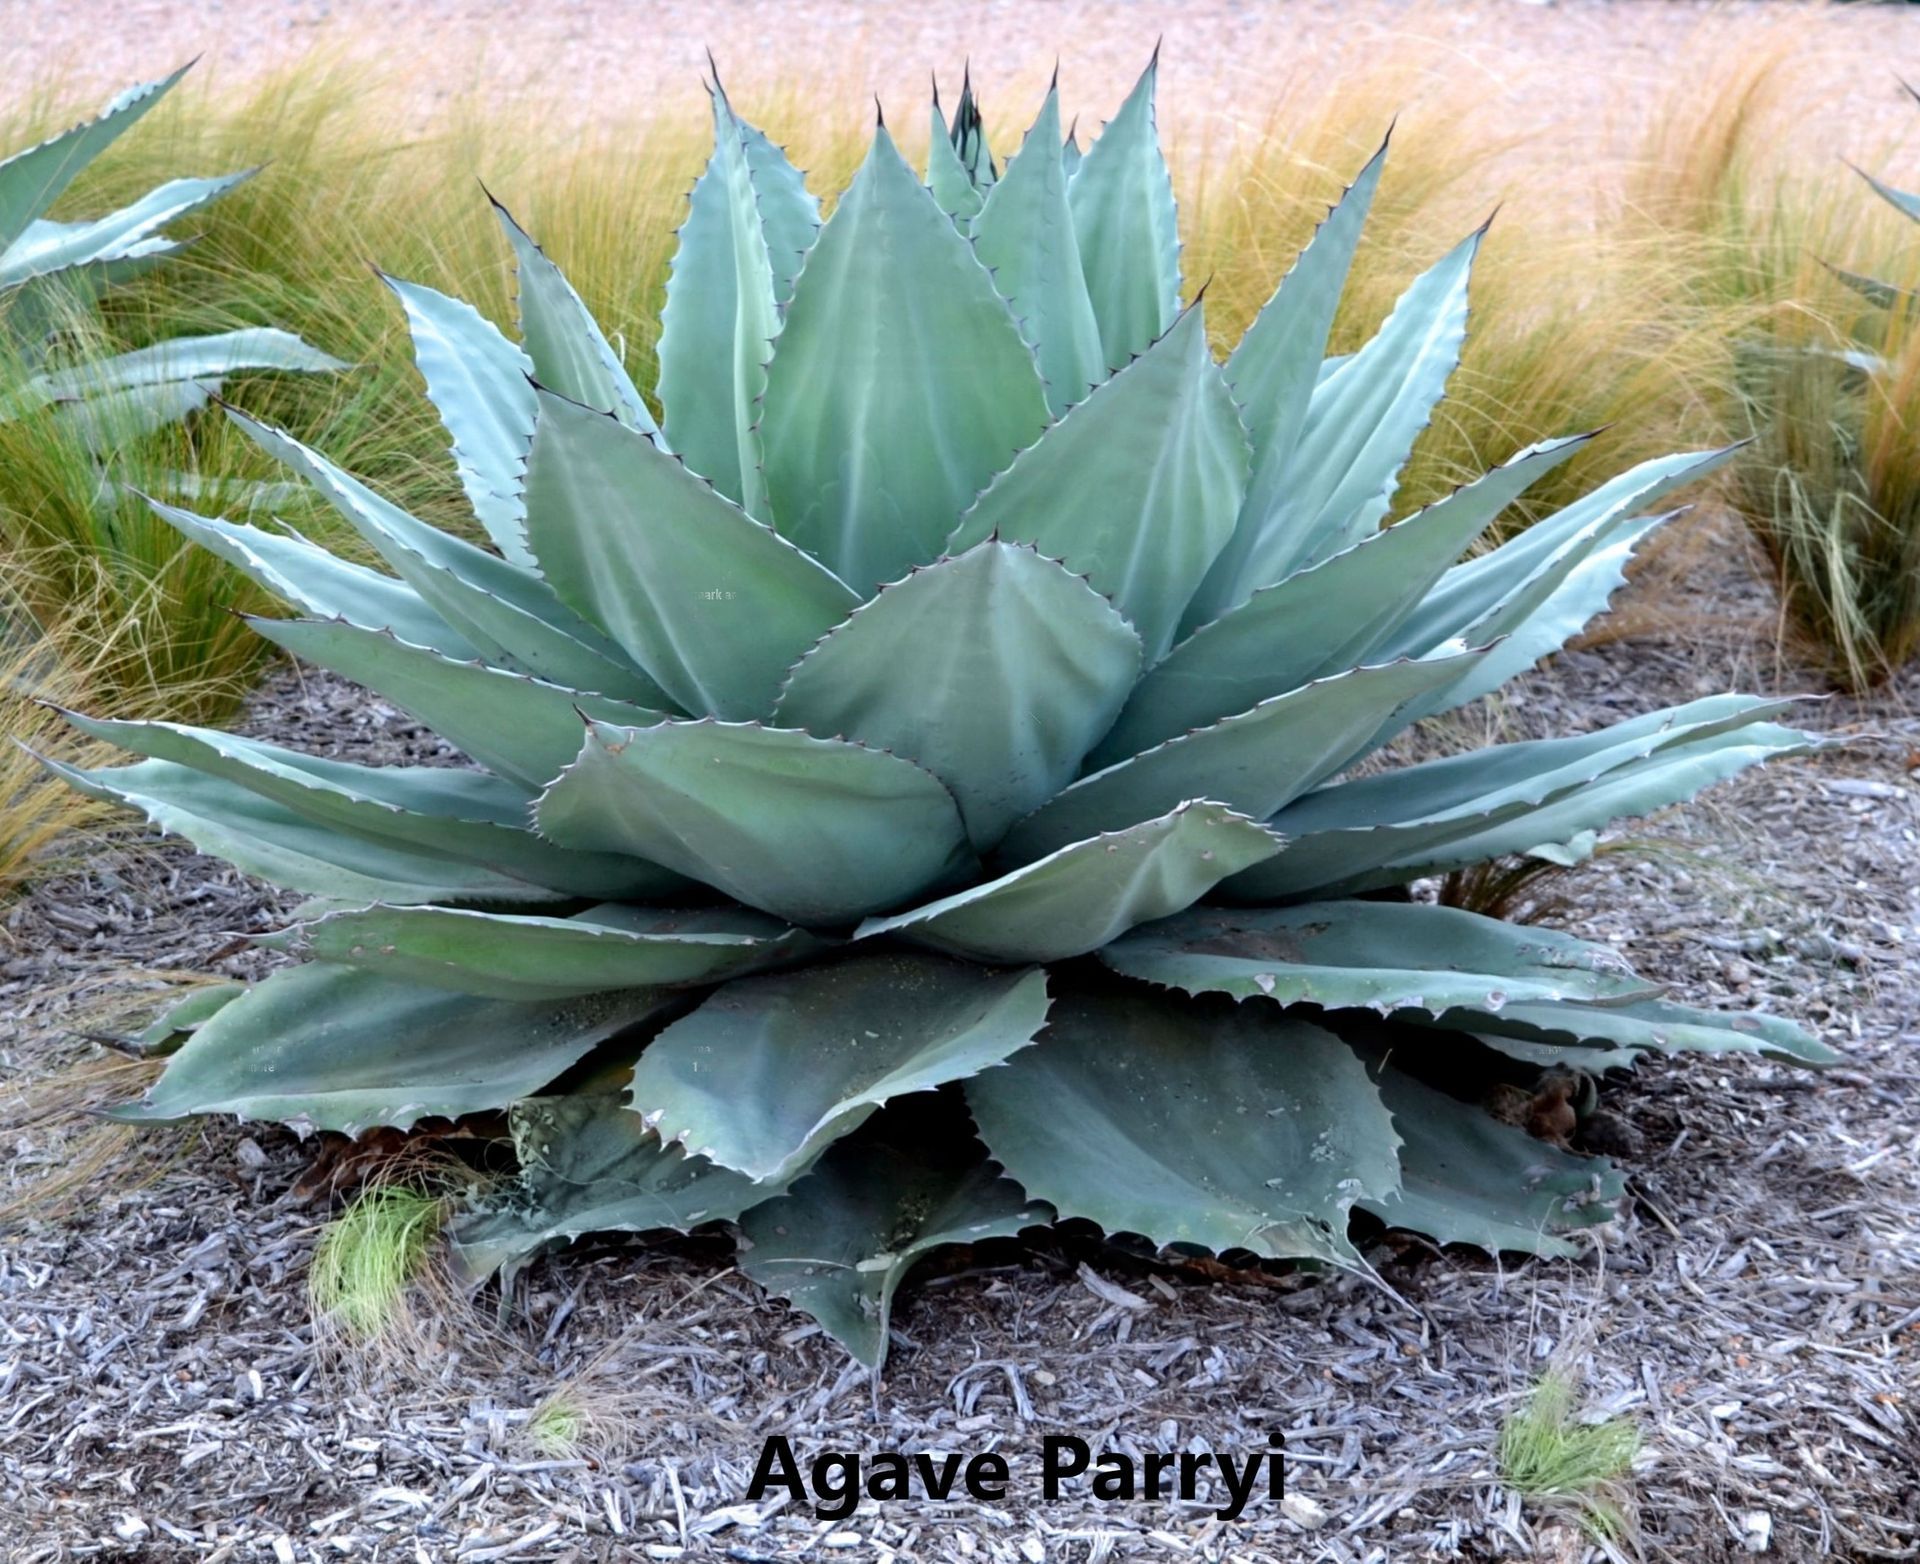 A full grown Agave Parryi cacti